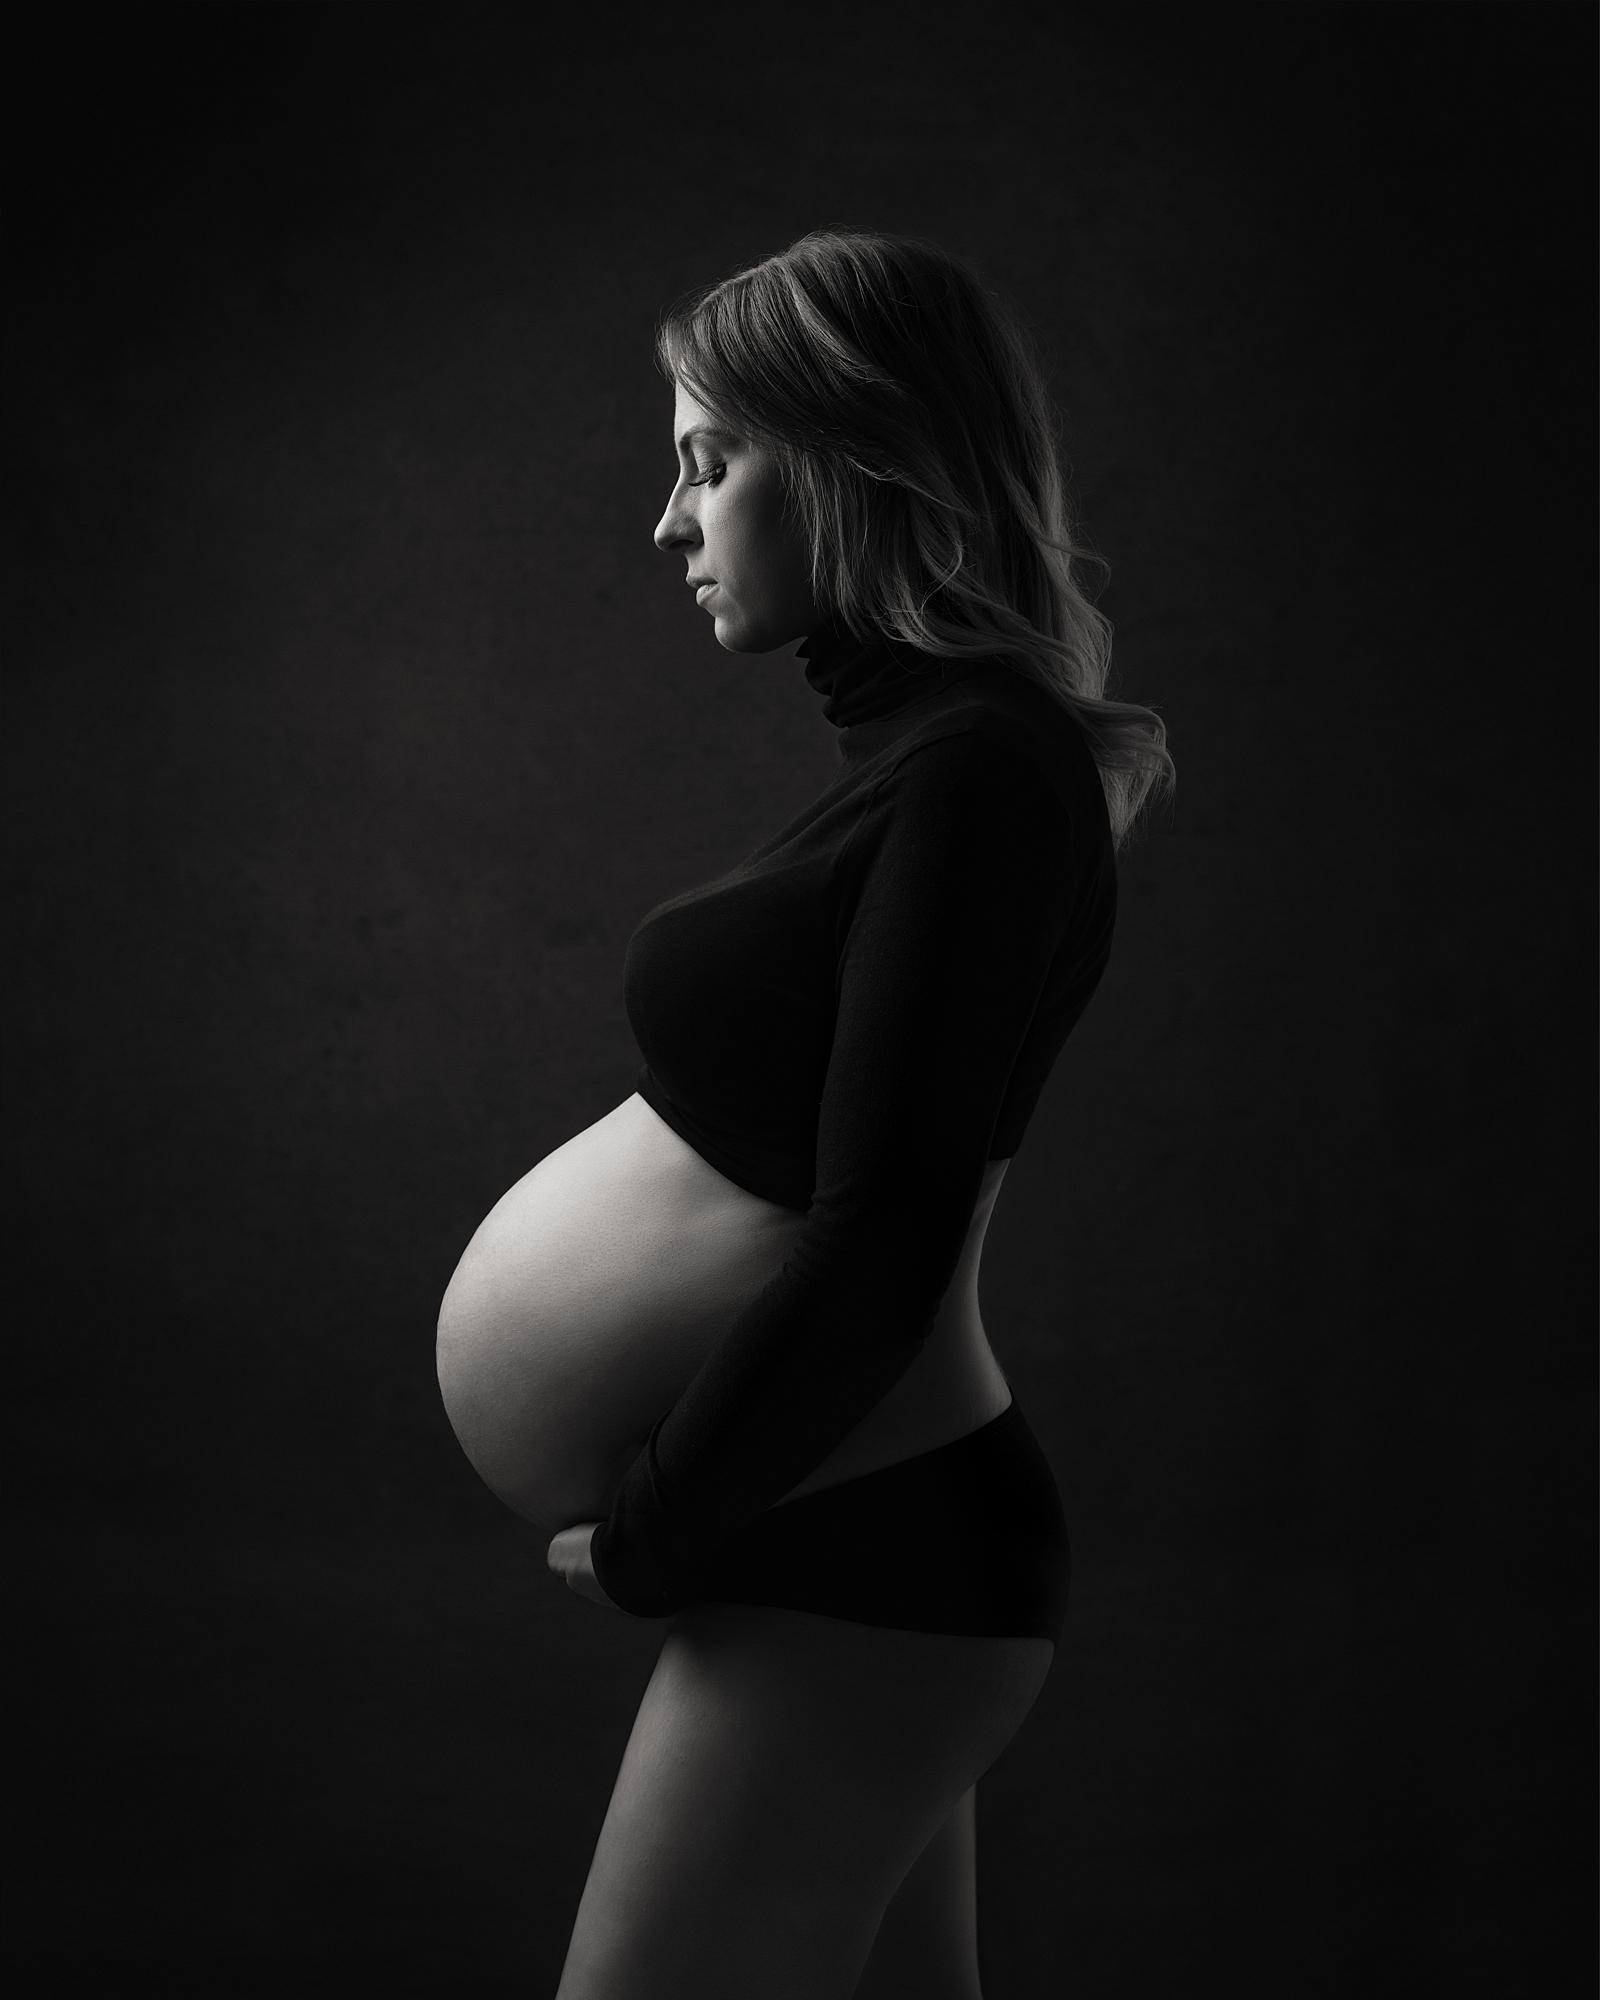 Black and white photograph of a pregnant womans profile against a black background